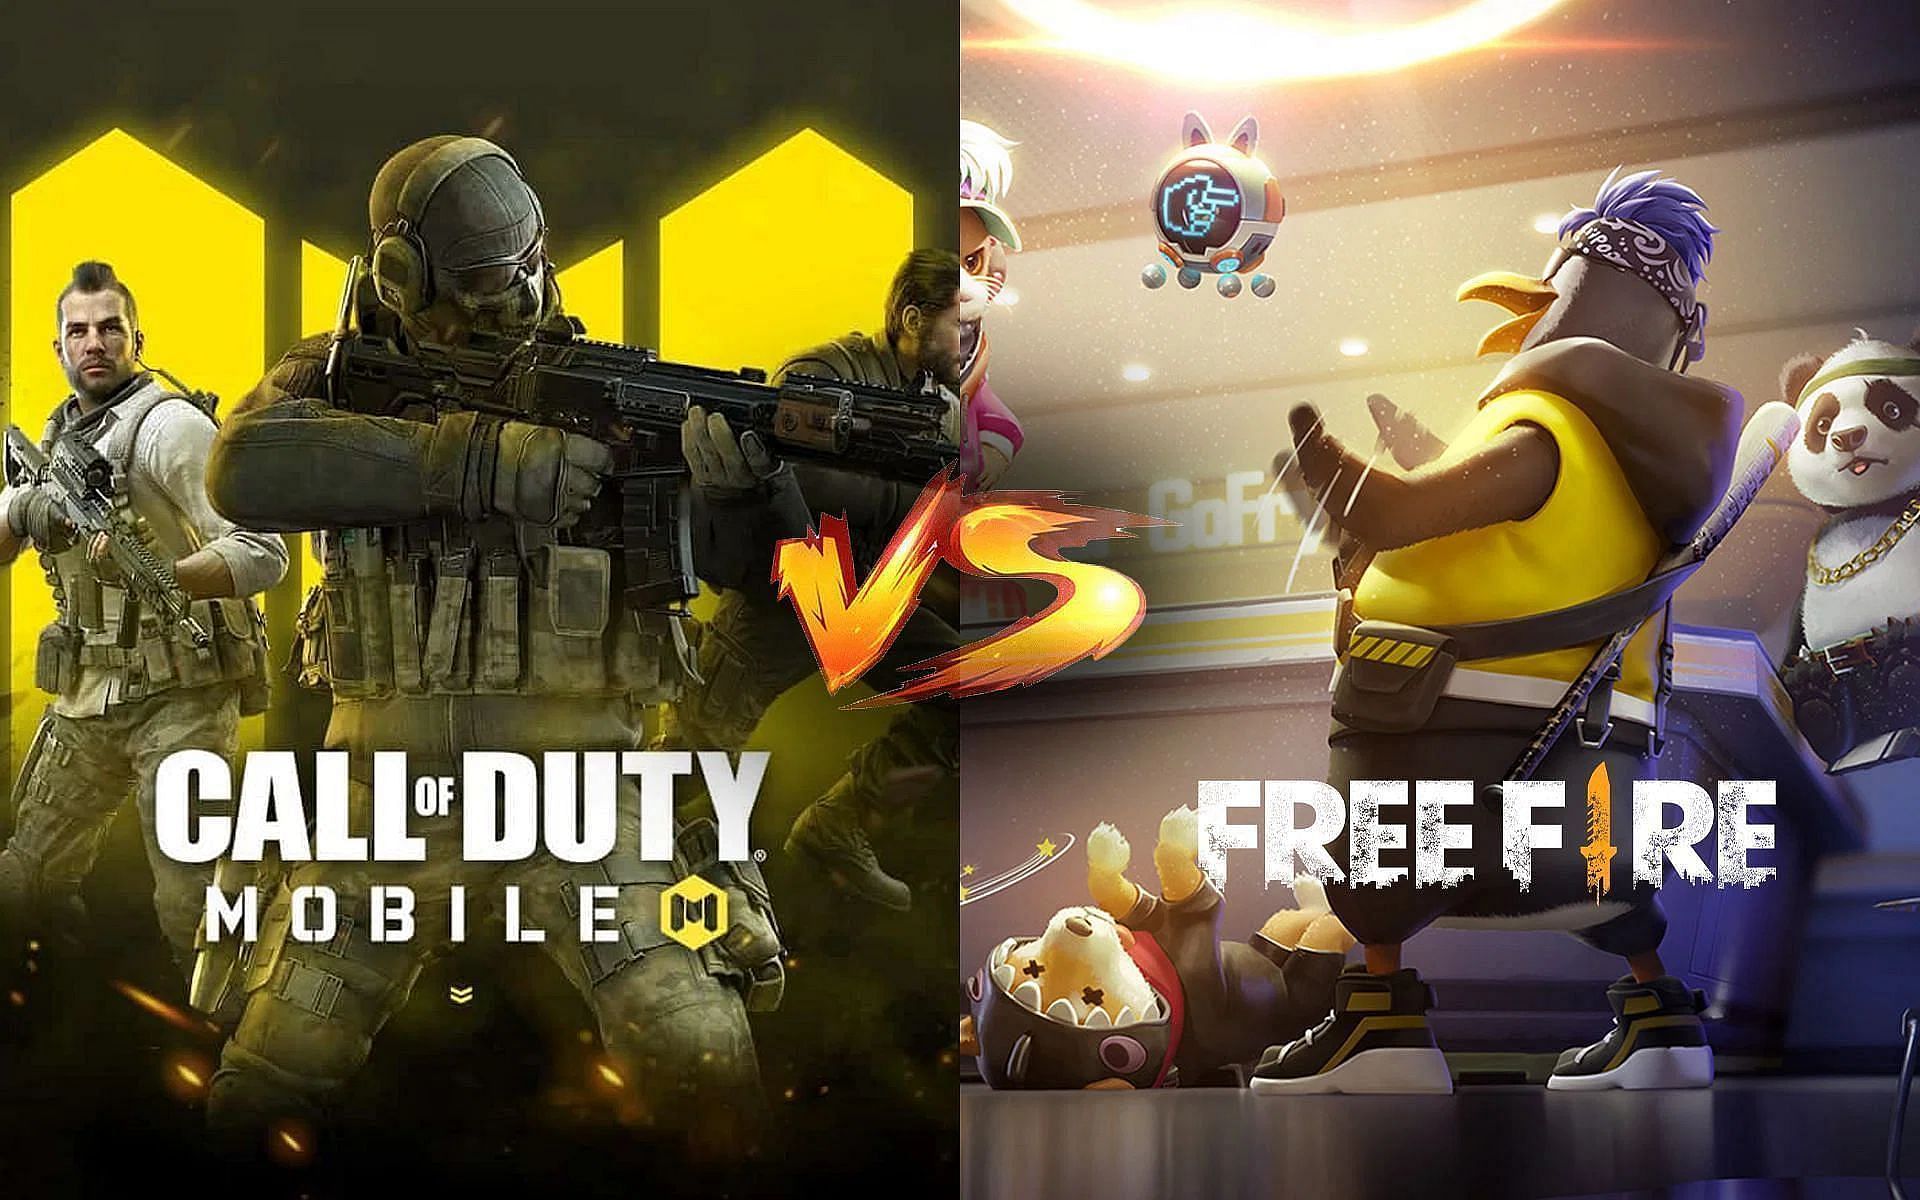 Free Fire vs COD Mobile: Which game is better for Android devices in 2022?